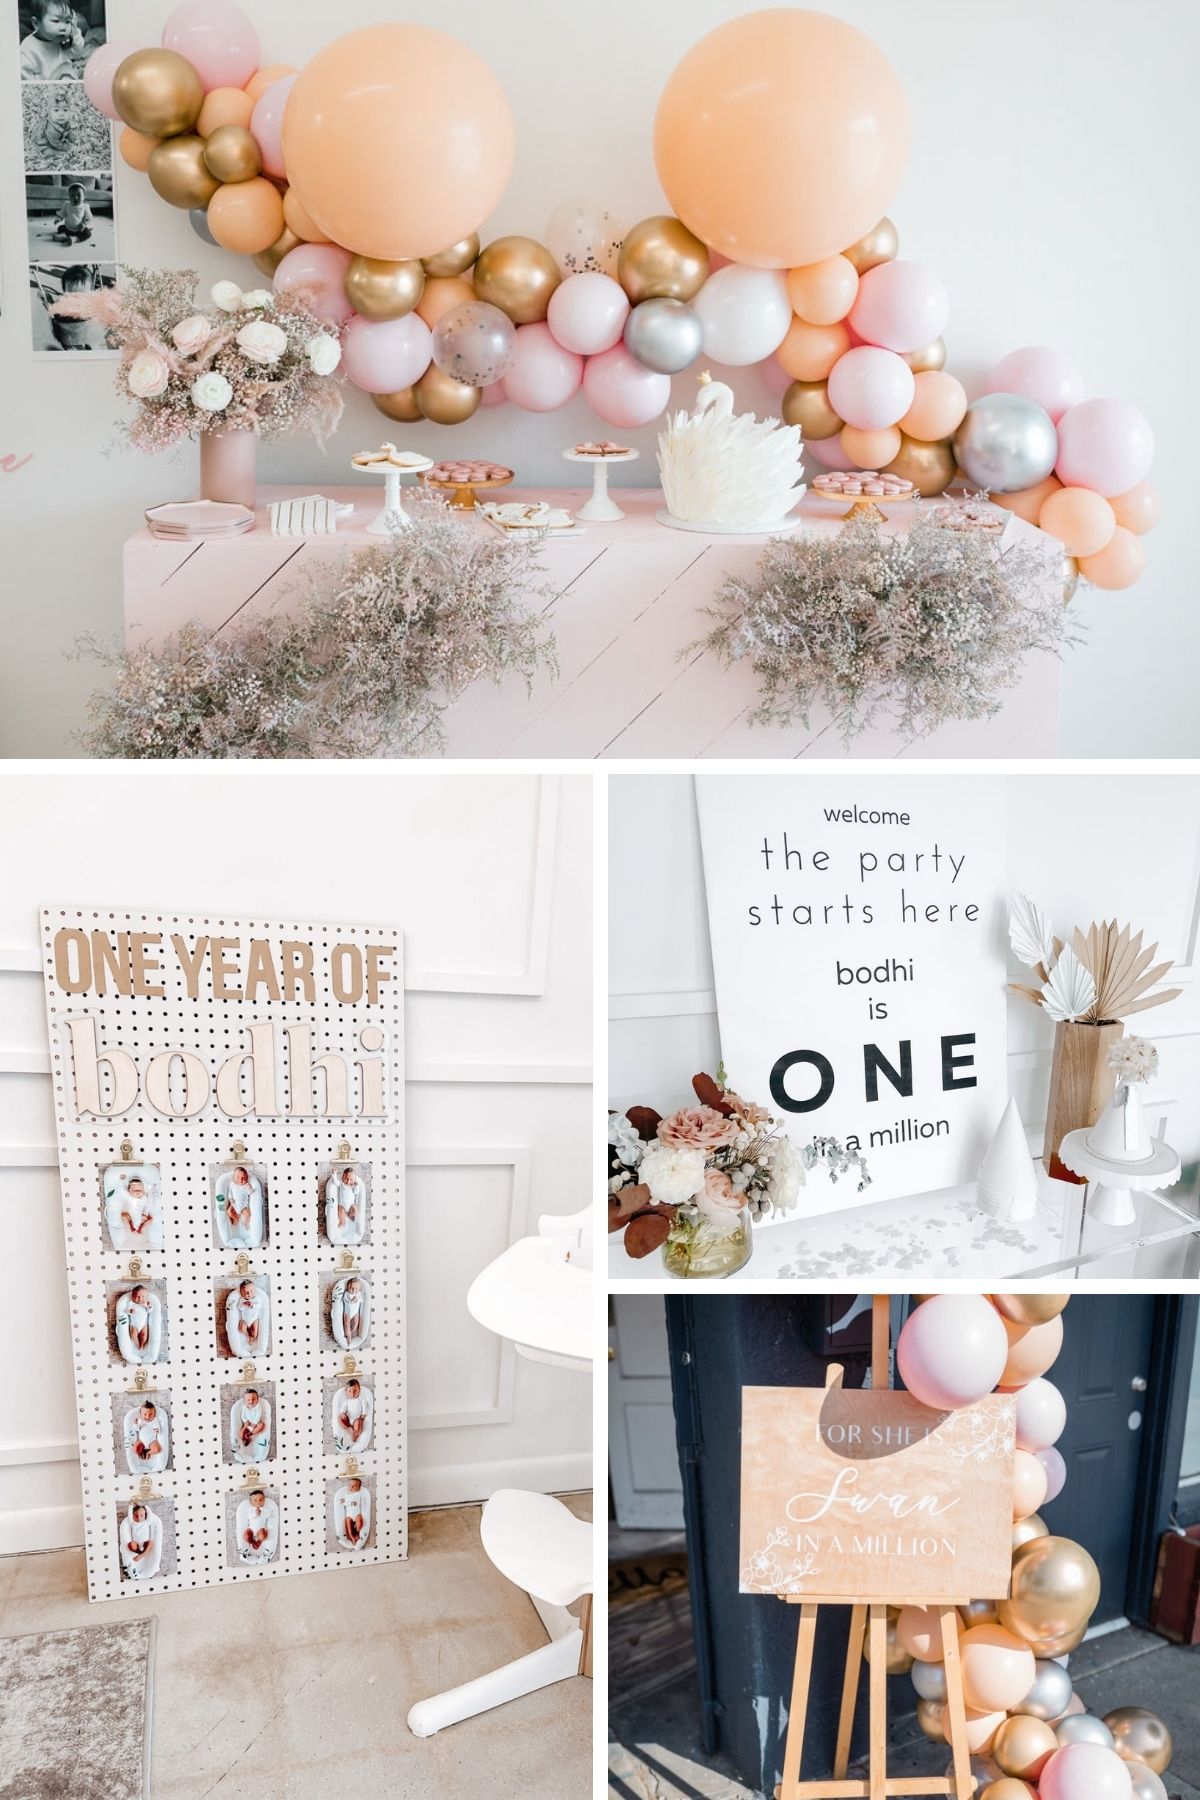 Photo collage from one in a million party theme including balloon garland, party sign and table scape.